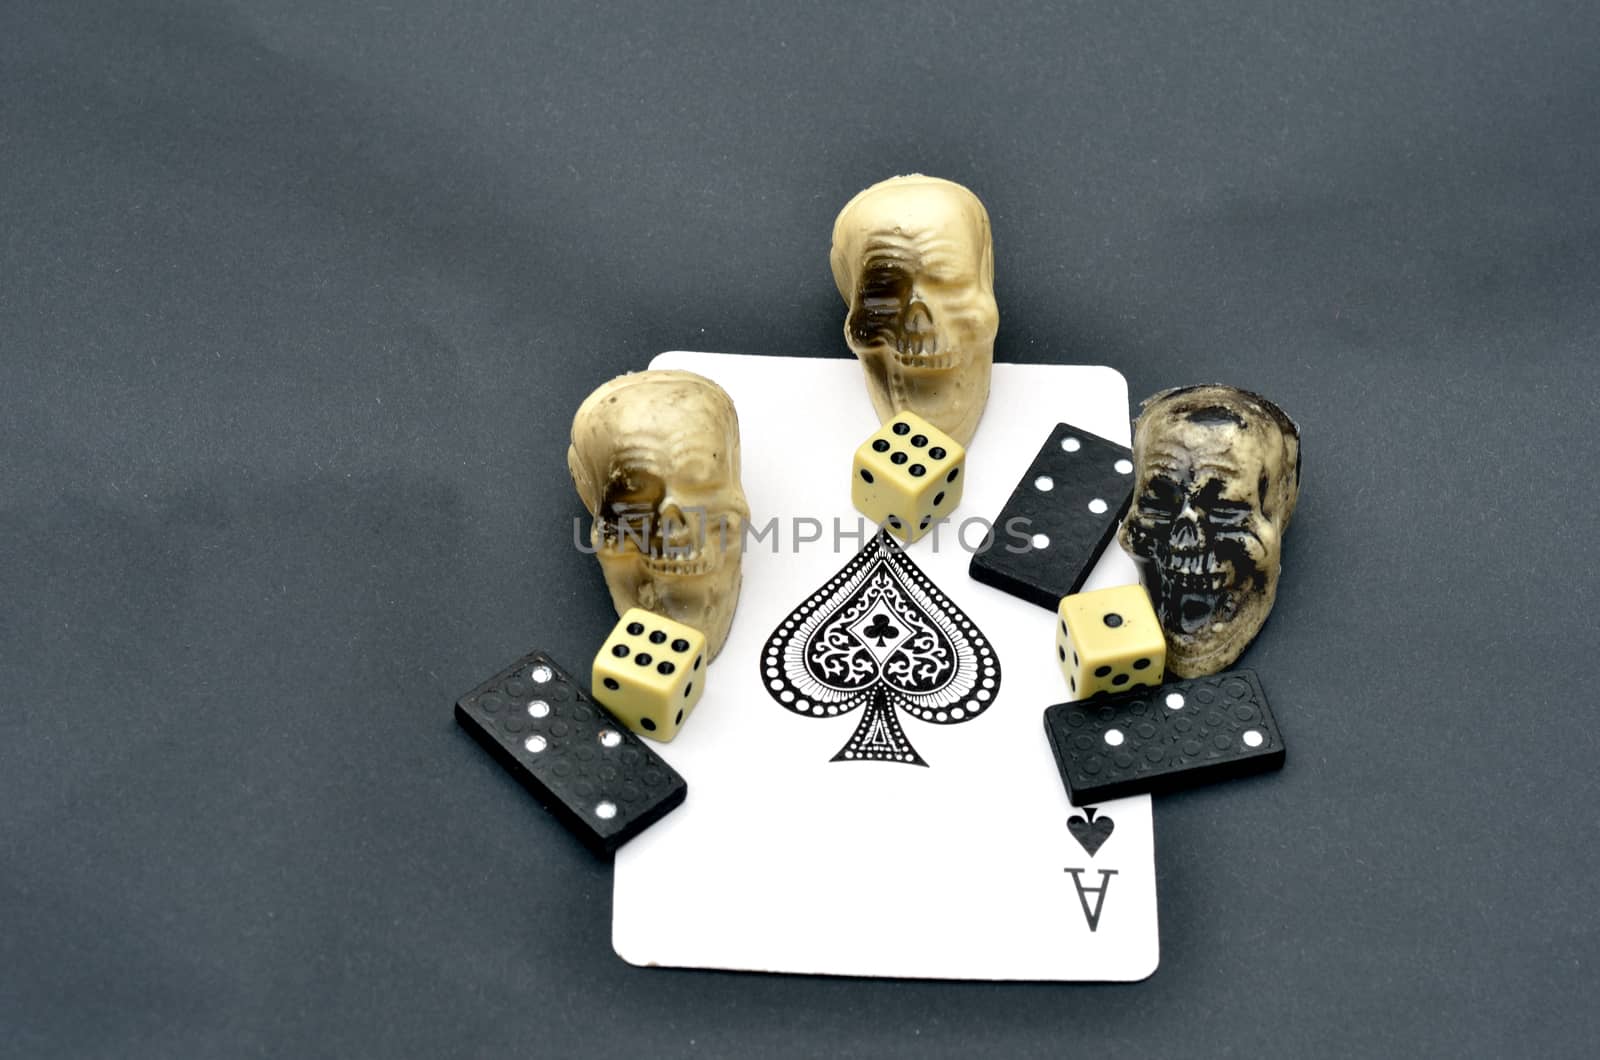 Dice skulls and dominoes on Ace